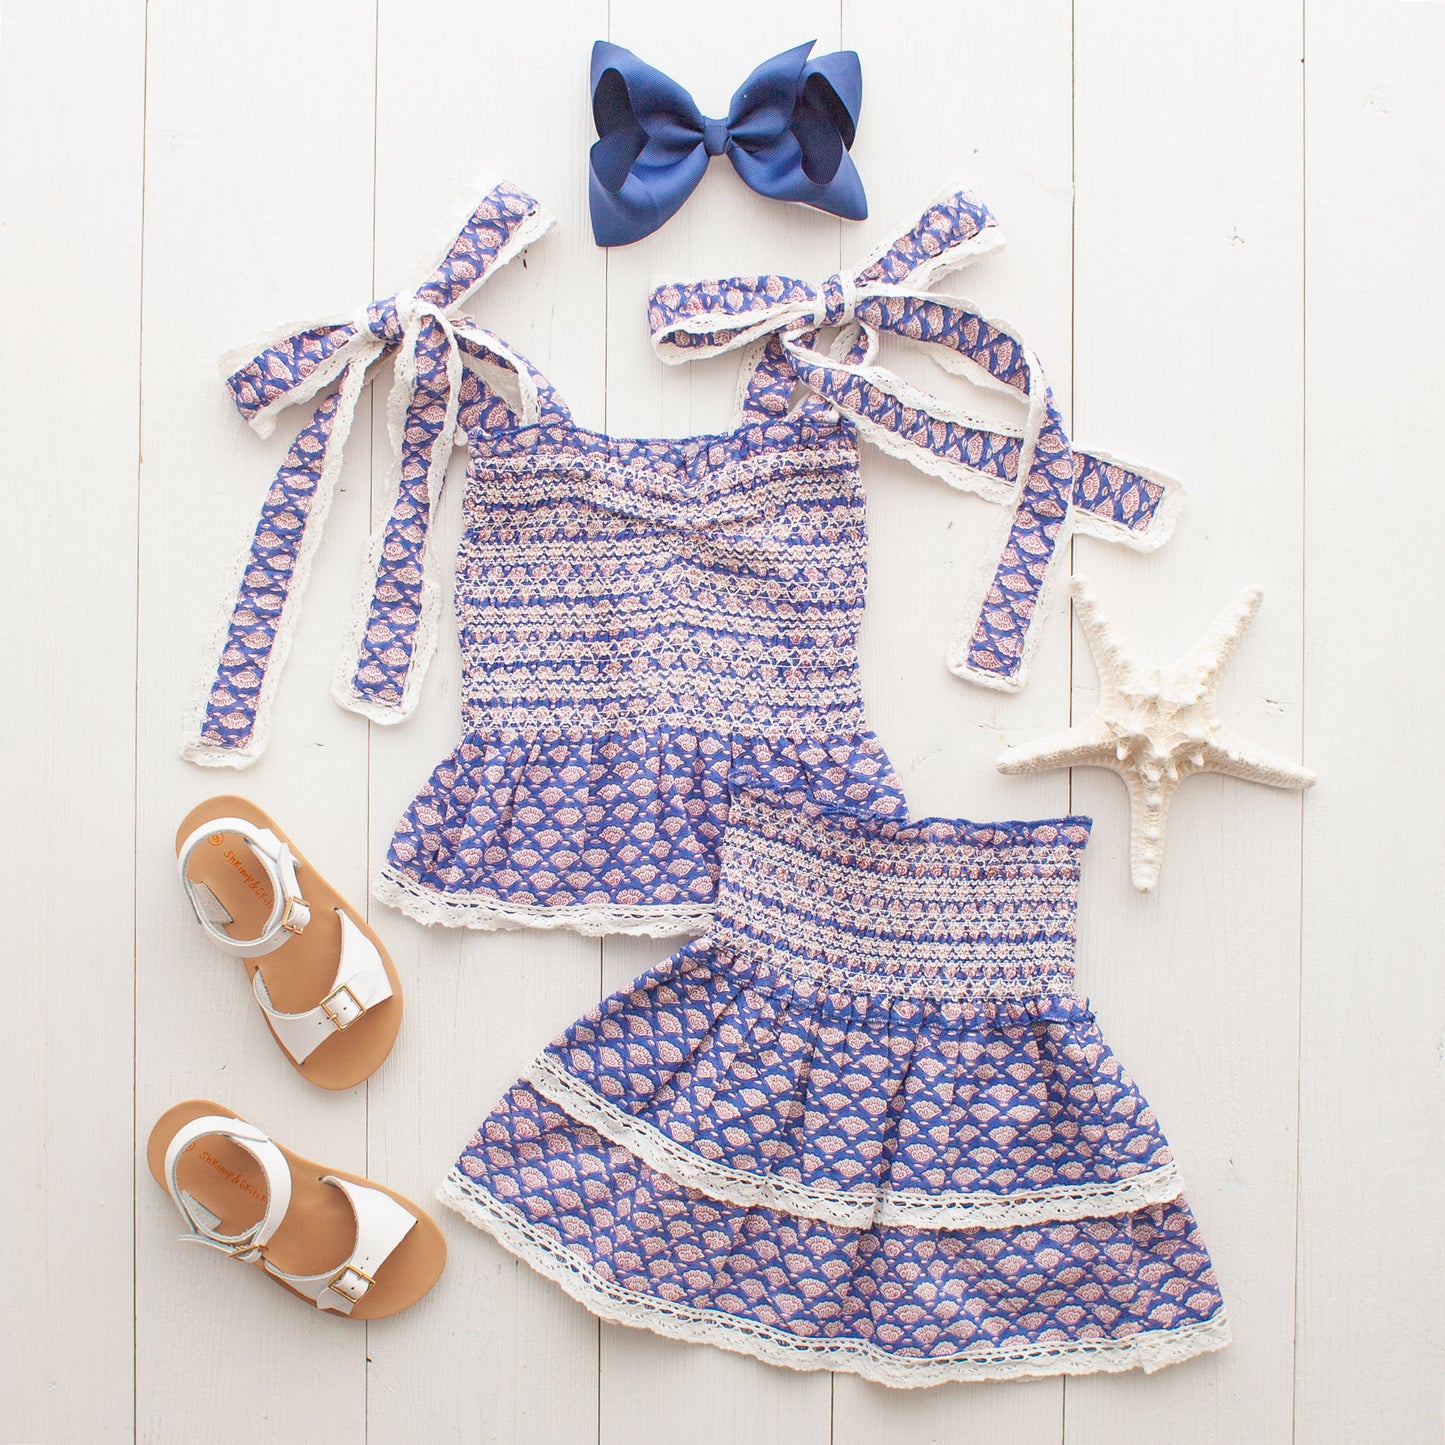 Bahama Blue Girl's Top flatlay with a blue bow and white sandals